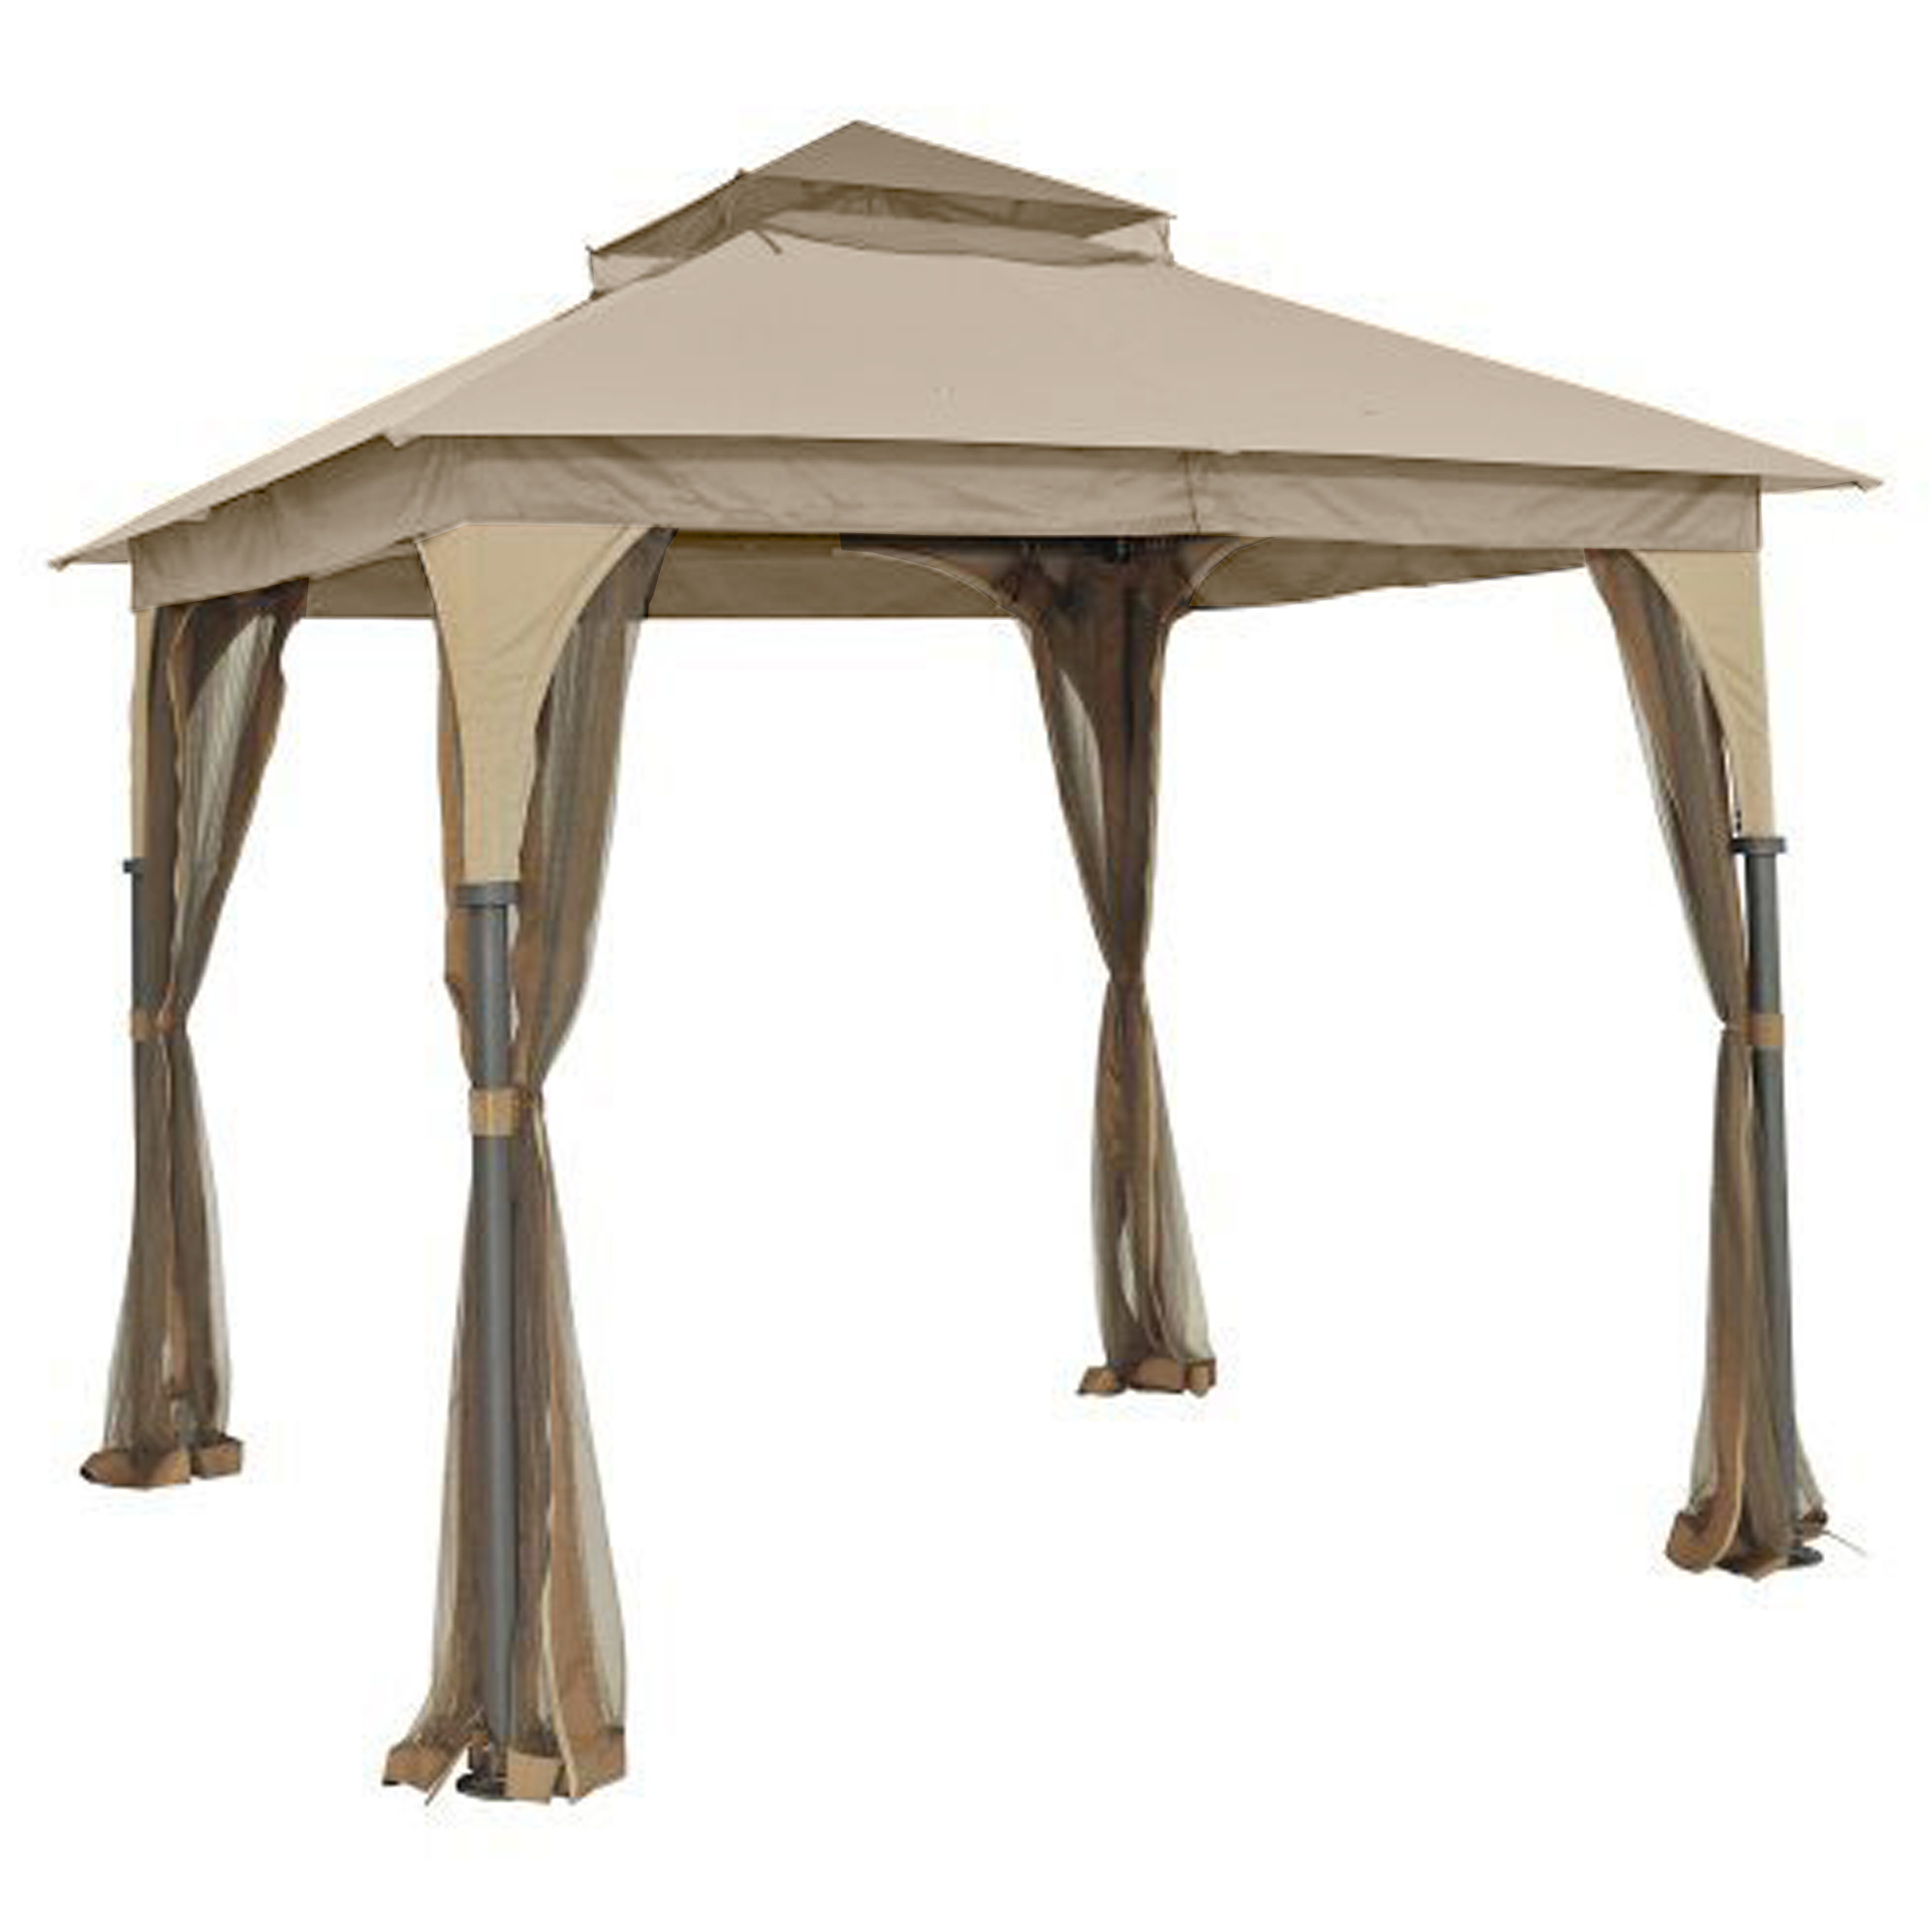 Replacement Canopy for Outdoor Patio 8x8 Gazebo - RipLock 350